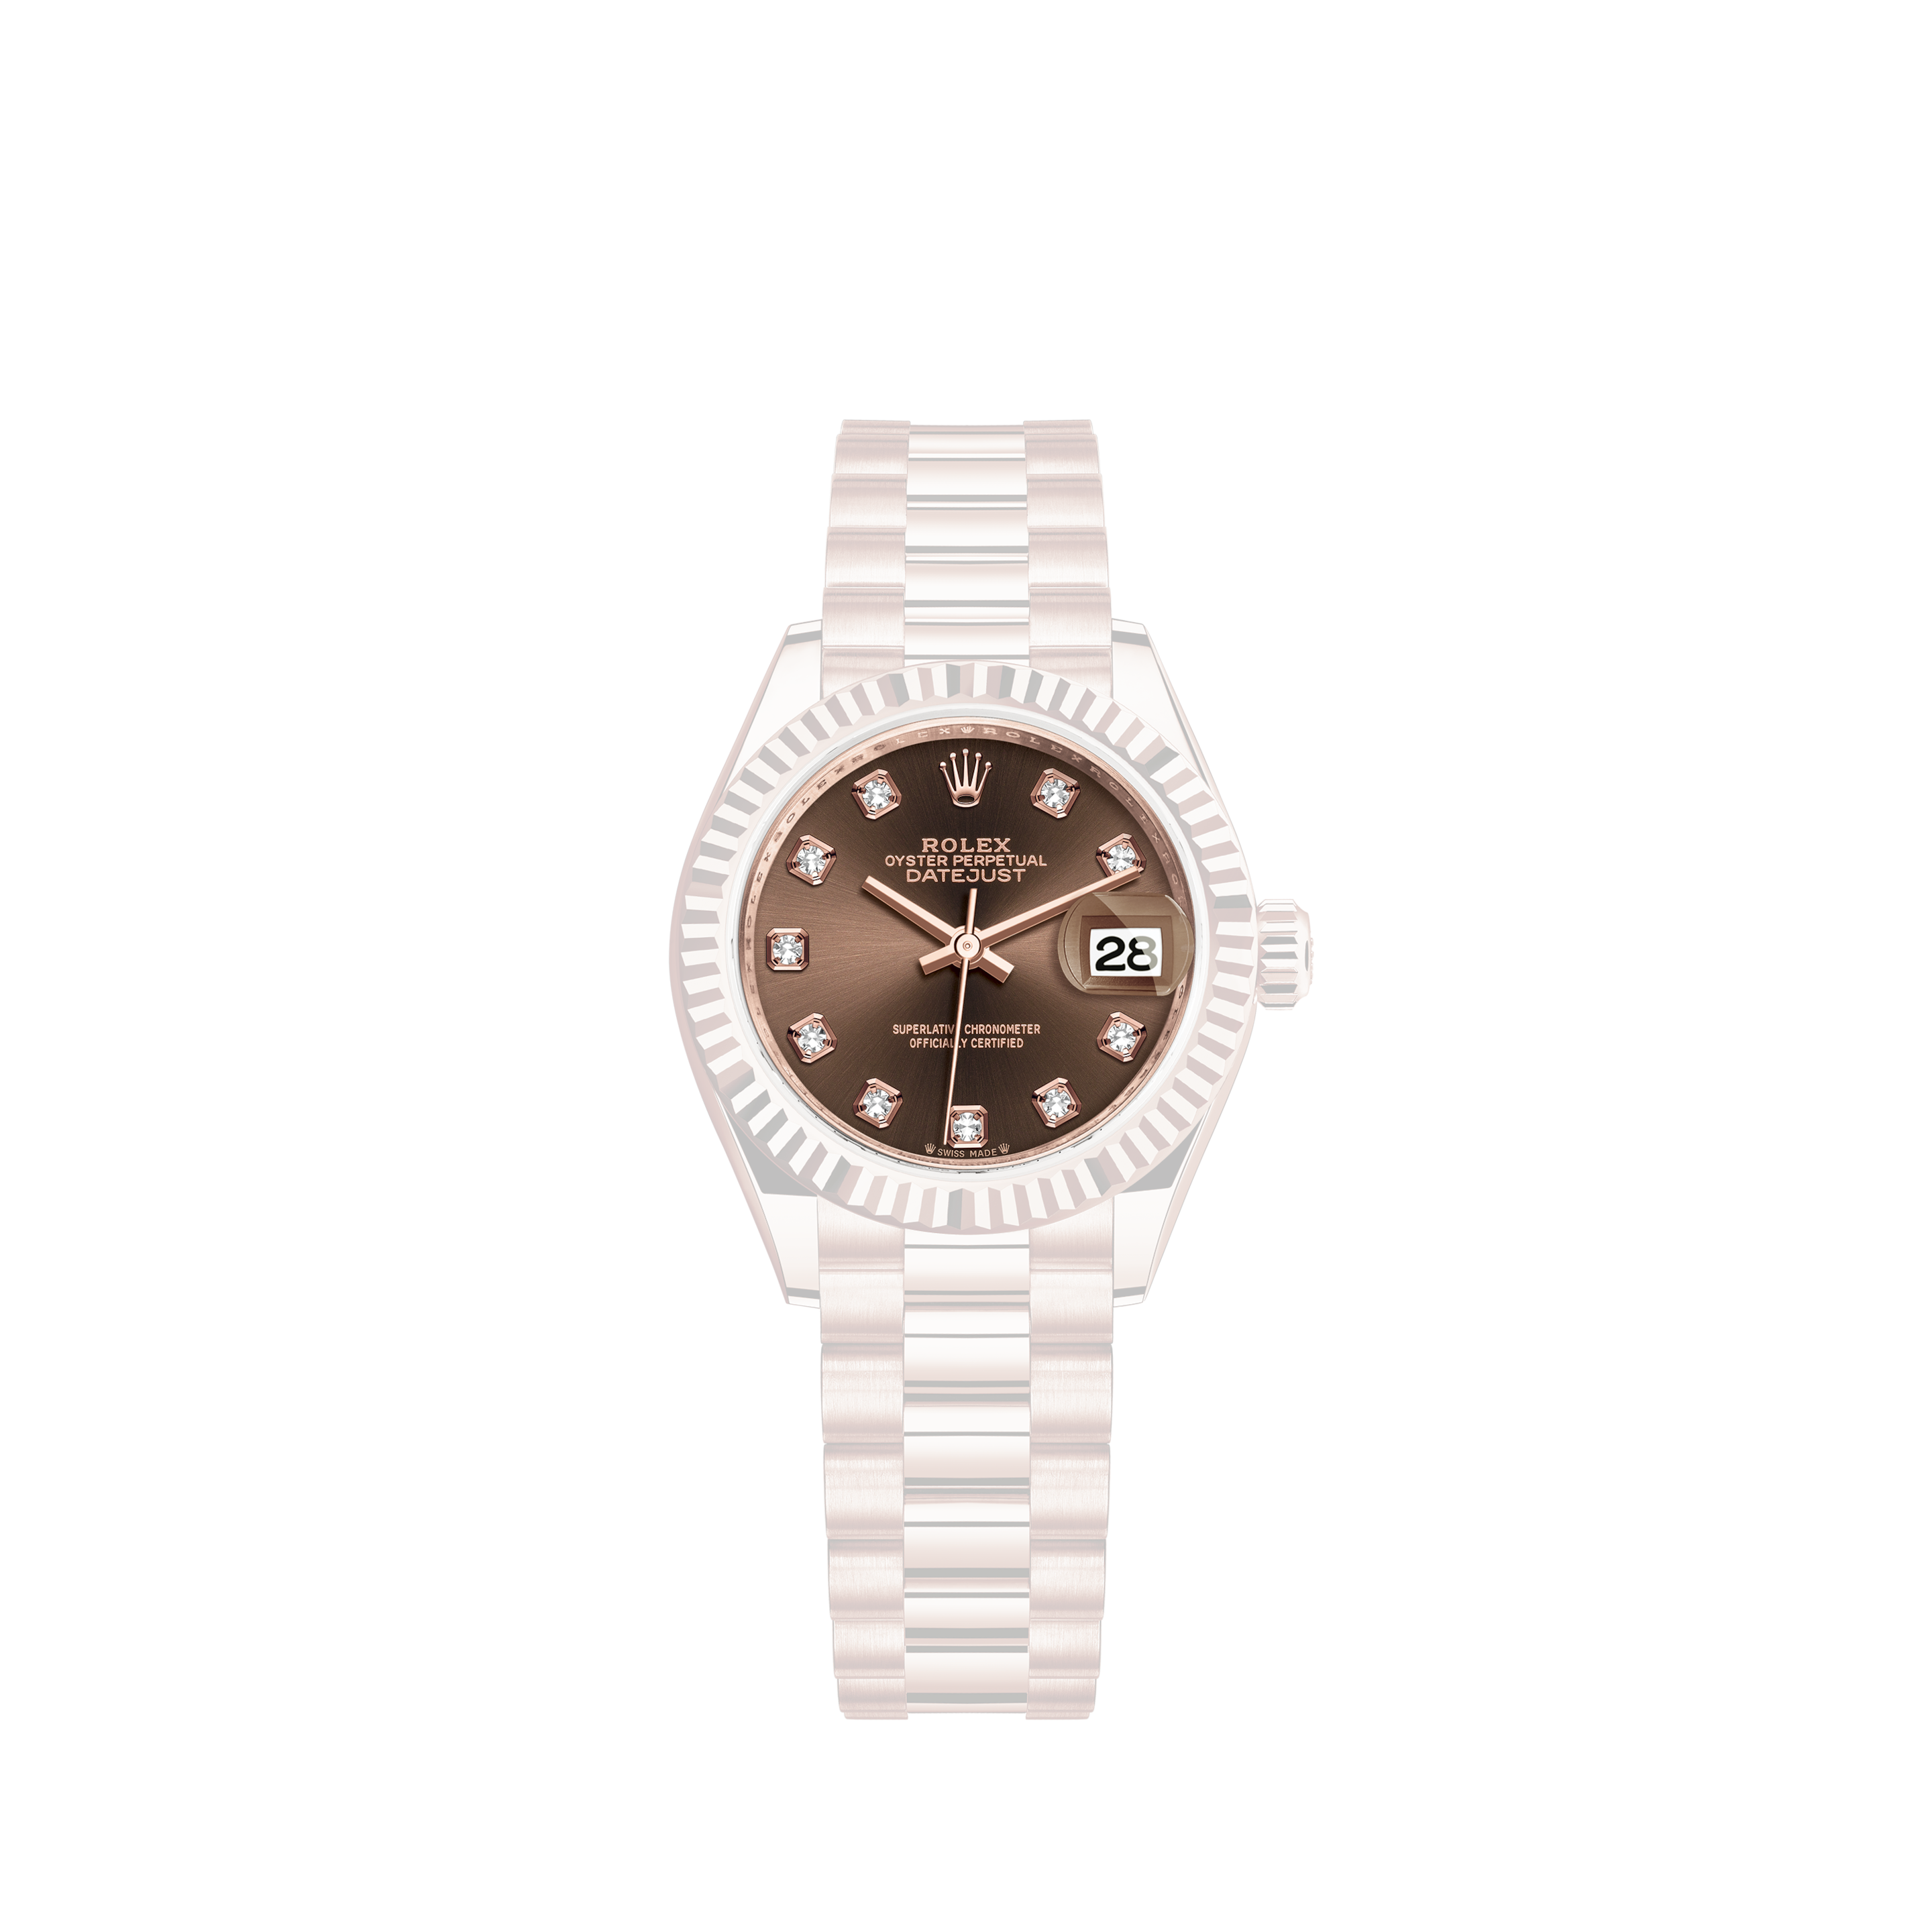 Rolex Datejust 36mm 4.6ct Dome Diamond Bezel/Imperial Red Roman Dial Steel Watch